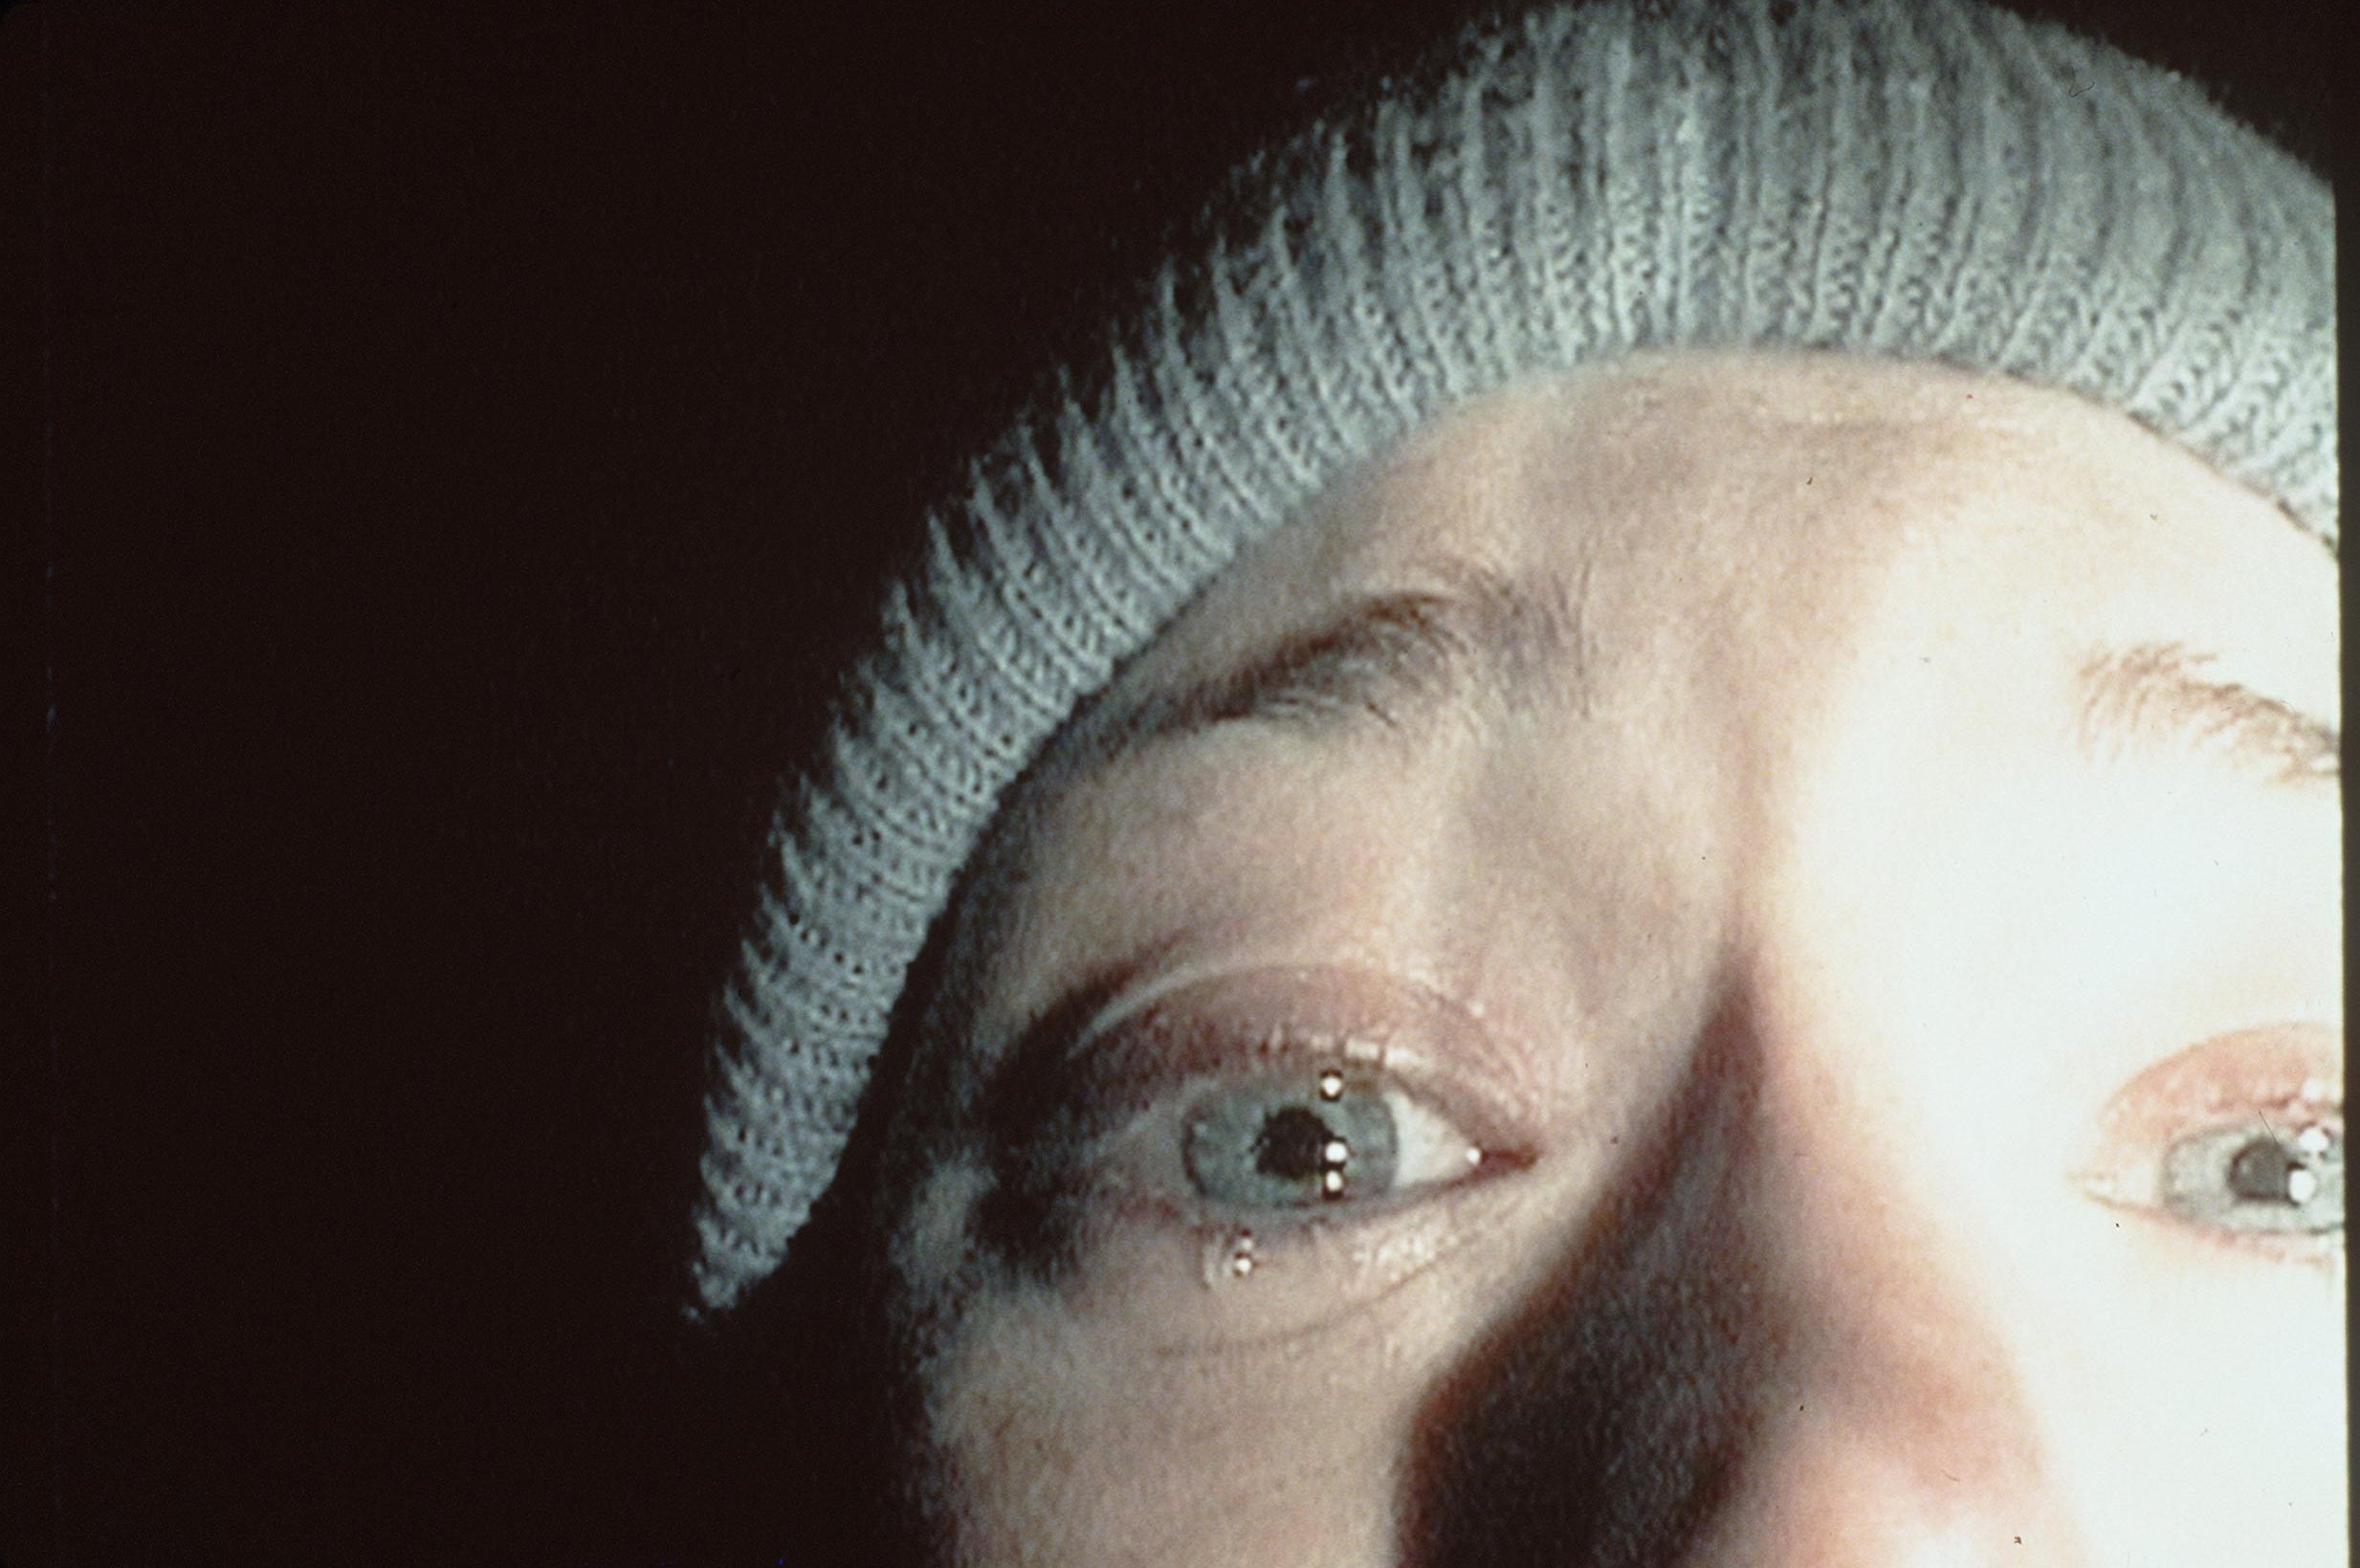 The Blair Witch Project is one of the scariest films